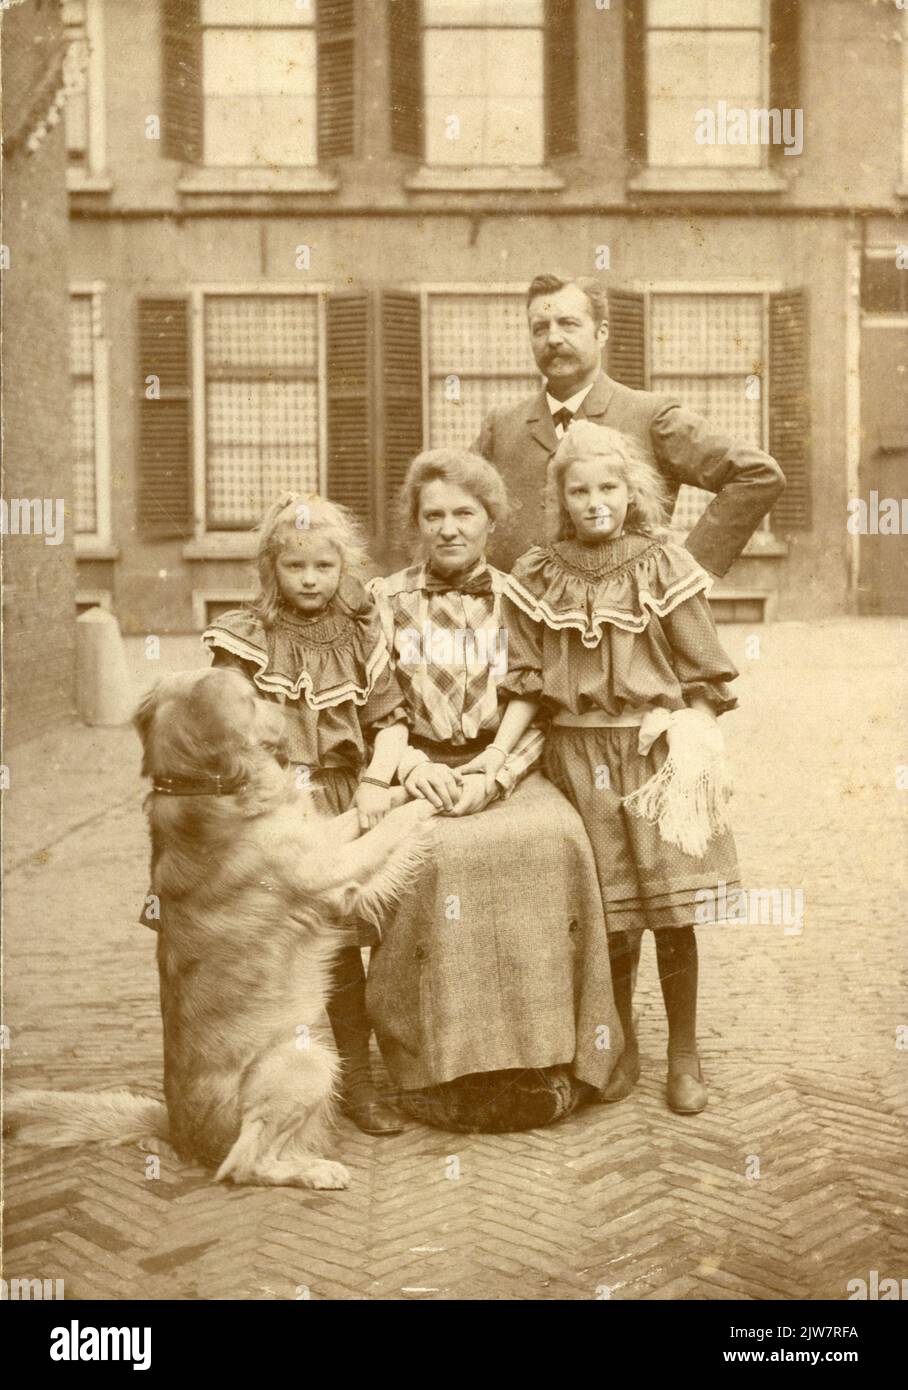 Group portrait of the Verheij-Helling van den Berg family with their dog in the inner area of the Rijksmunt (Oudegracht Weerdzijde 73), with from left to right Catharina Verheij (1899-1982), Catharina Verheij-Helling van den Berg (1868-1947) , Kornelis Jan Verheij (1859-1907, chief manufacture at the Rijksmunt) and Wilhelmina Verheij (1897-1972) .n.b. The address Oudegracht Weerdzijde 73 was changed in 1917 to Oudegracht 108. Stock Photo